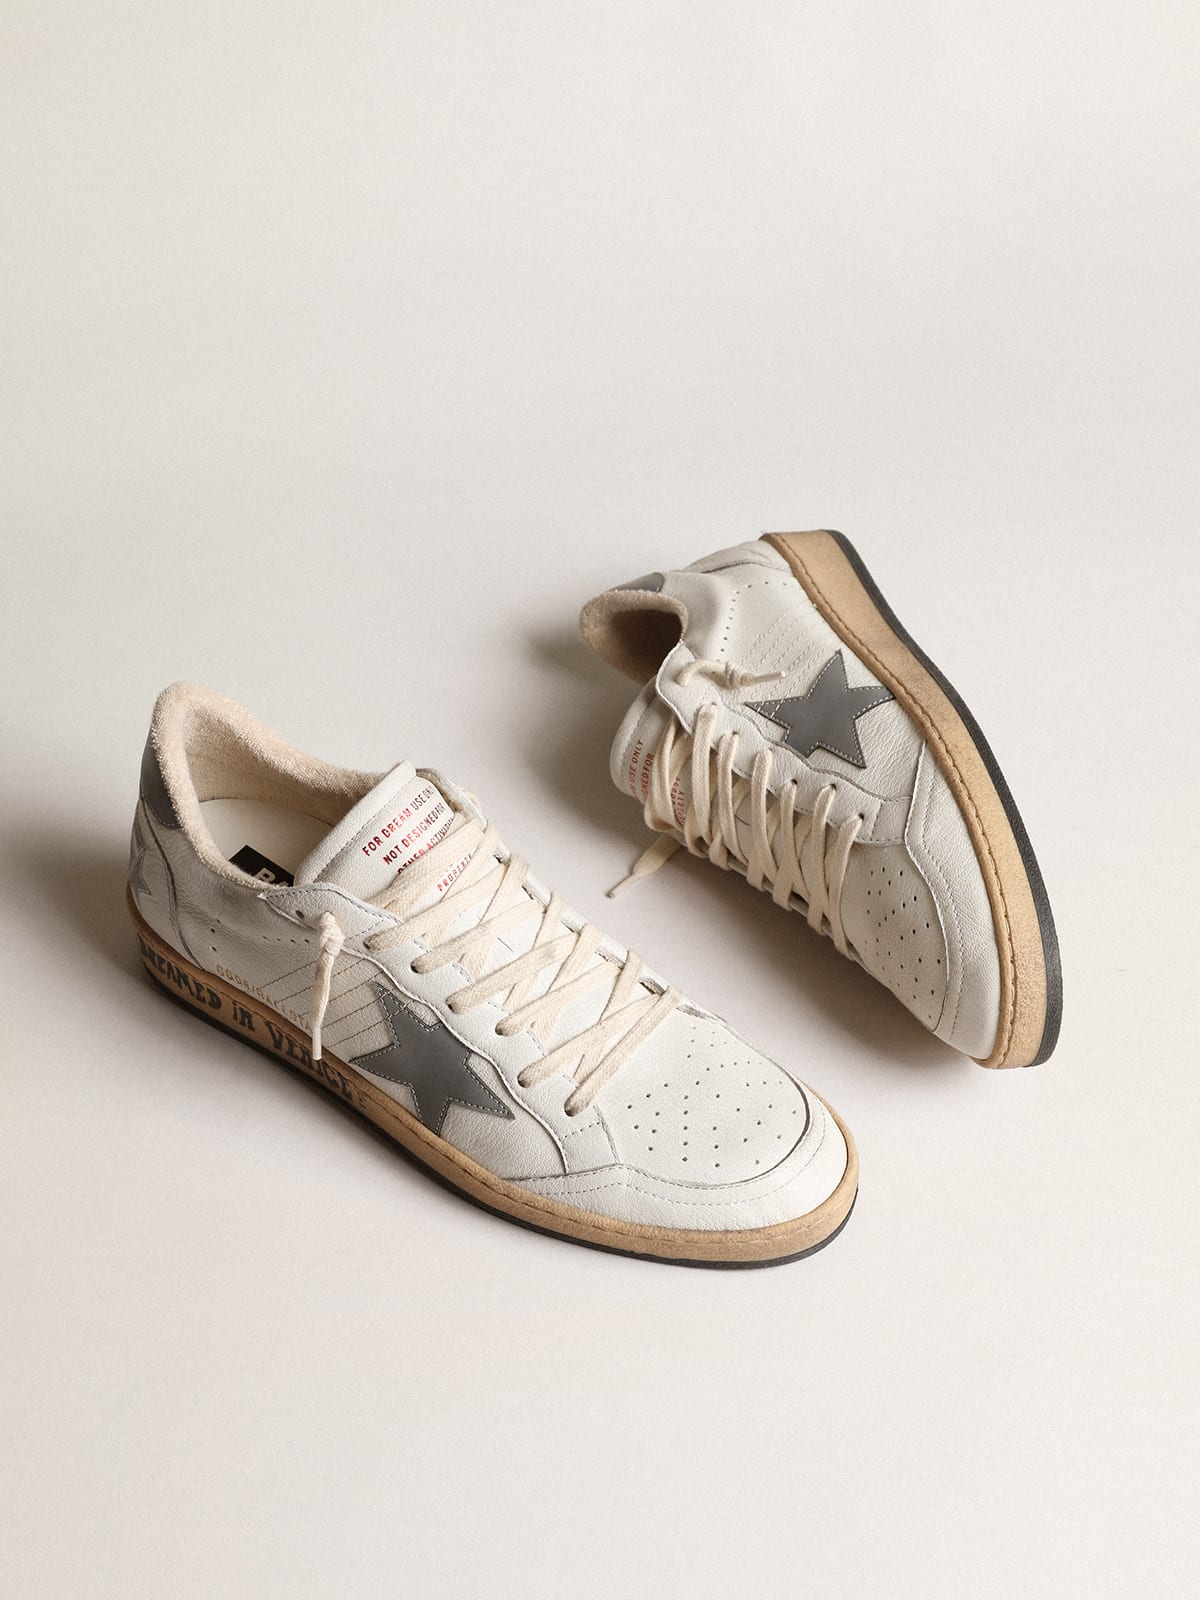 Golden Goose - Ball Star in nappa with gray reflective nylon star and heel tab in 